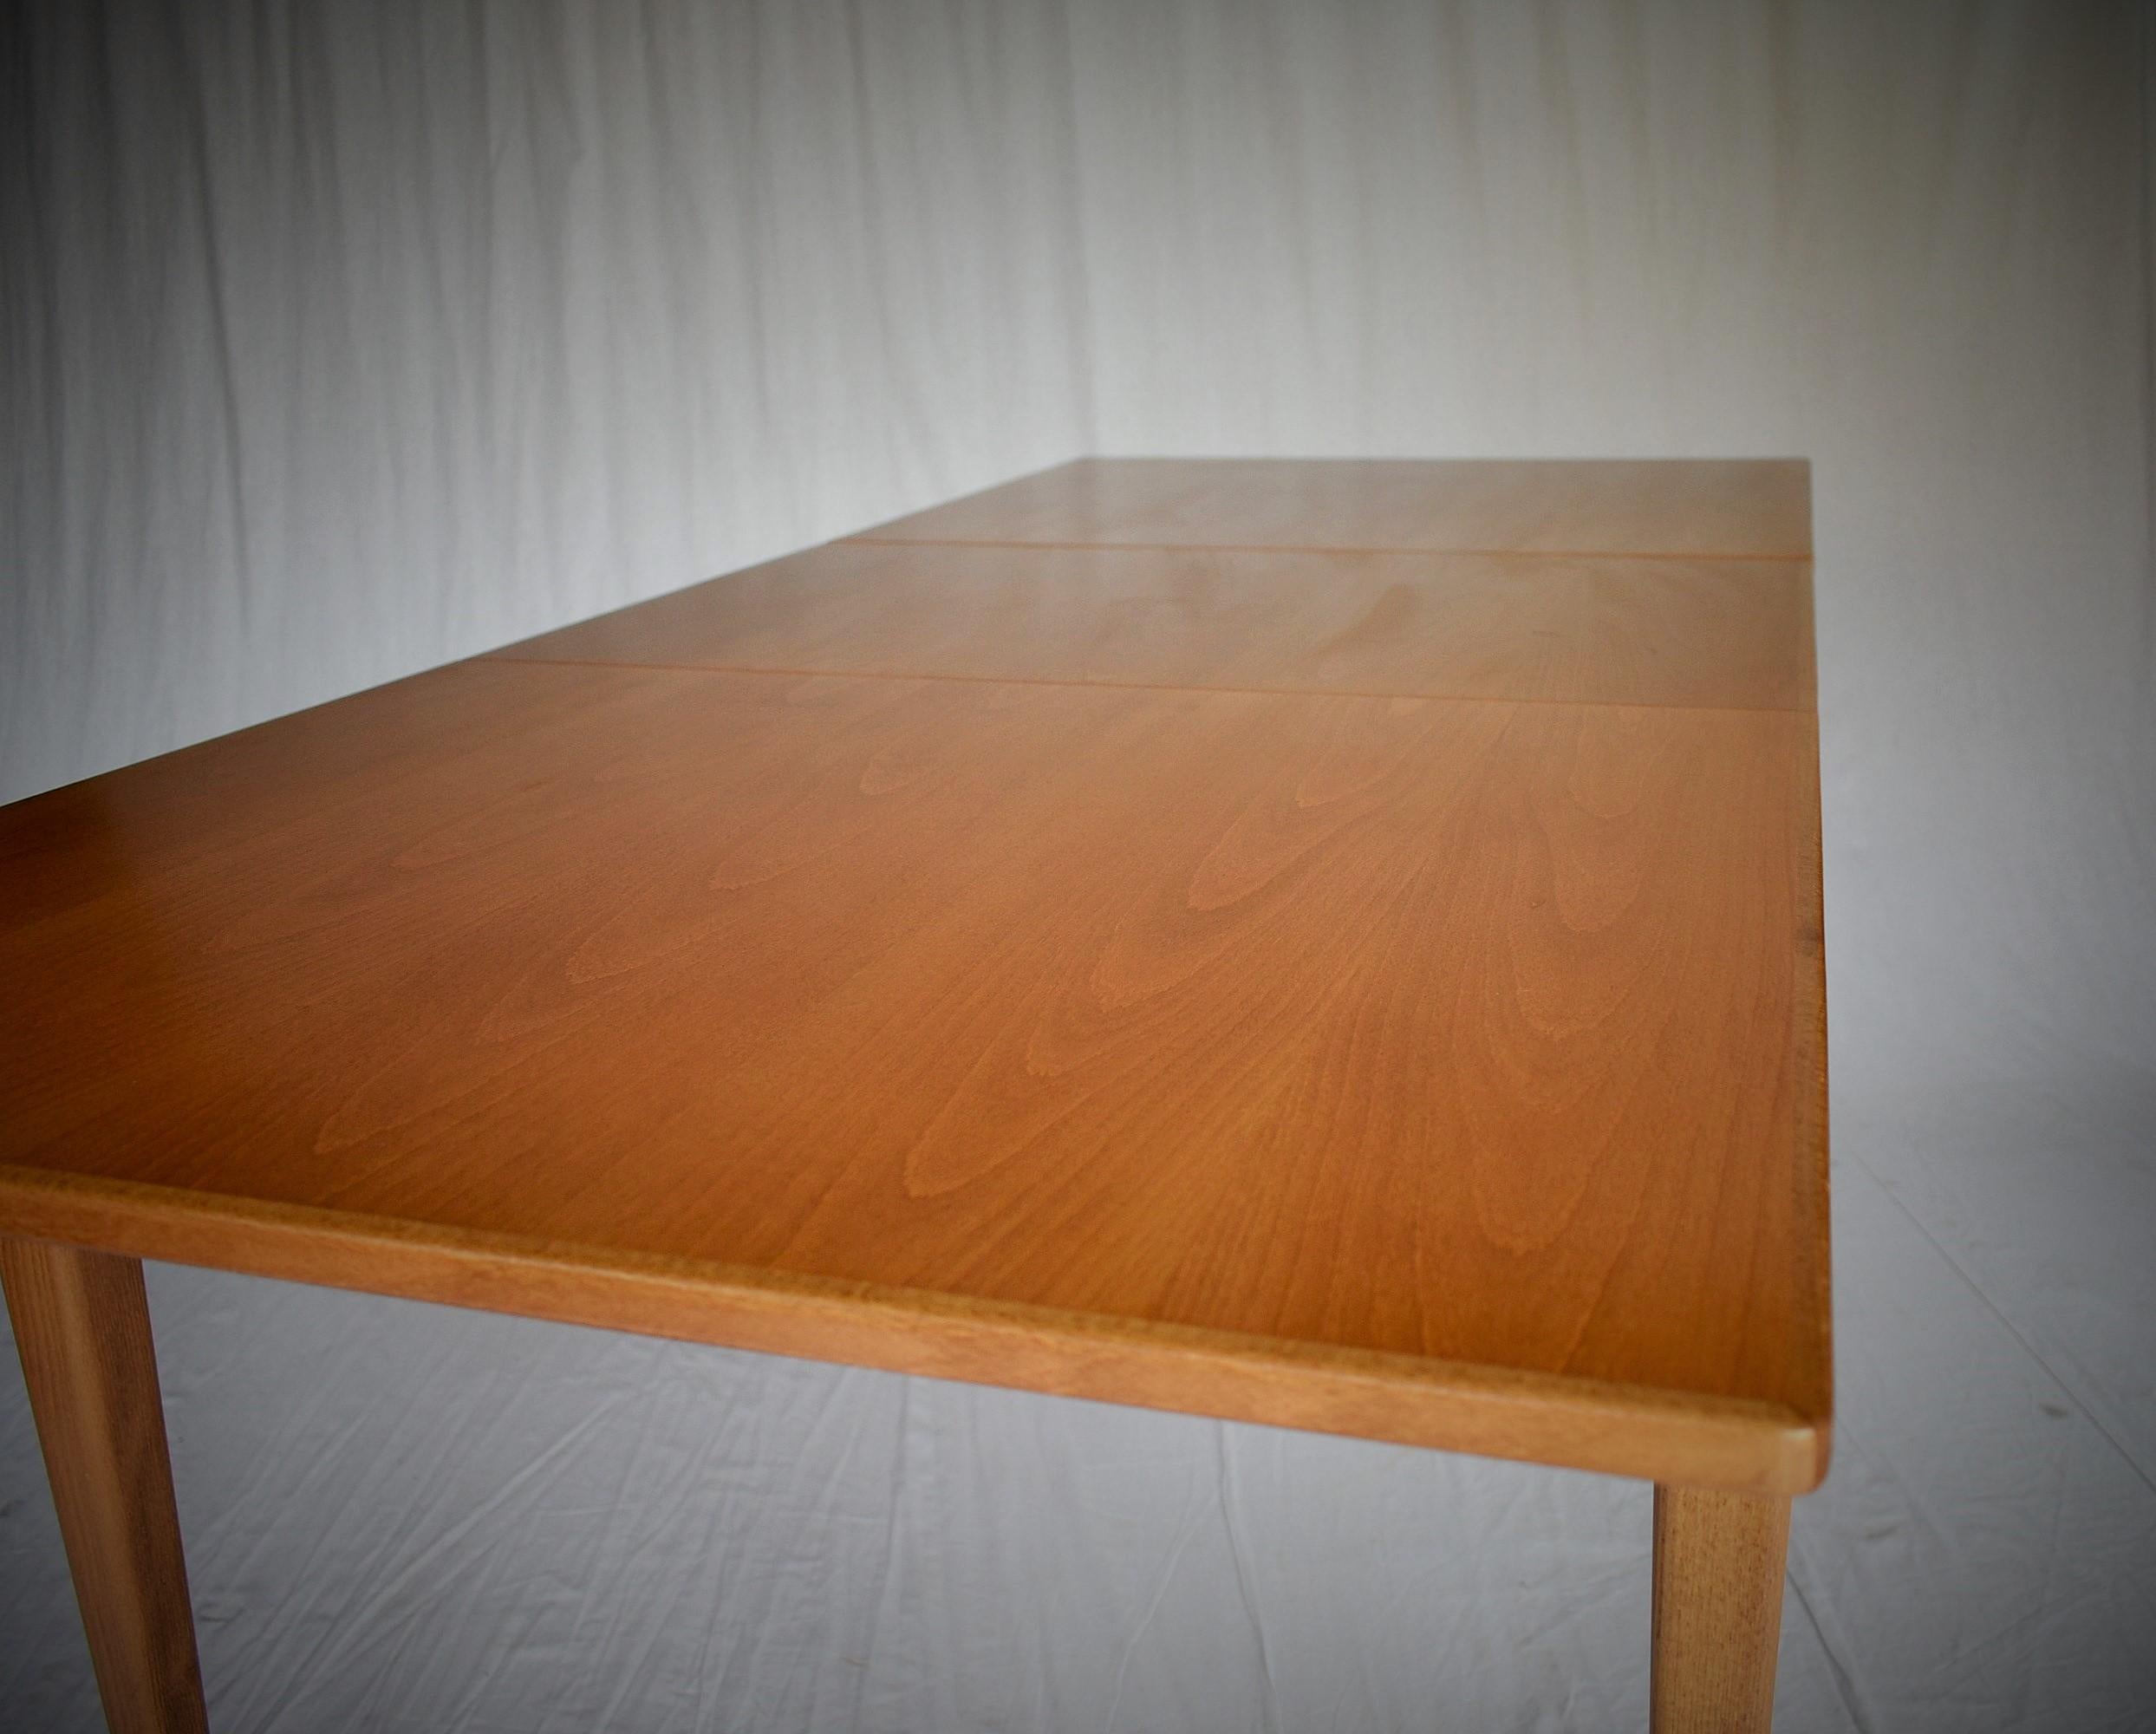 - Made in Czechoslovakia 
- Made of wood 
- Dimension of extendable: Width 180 cm.
- Good, original condition.